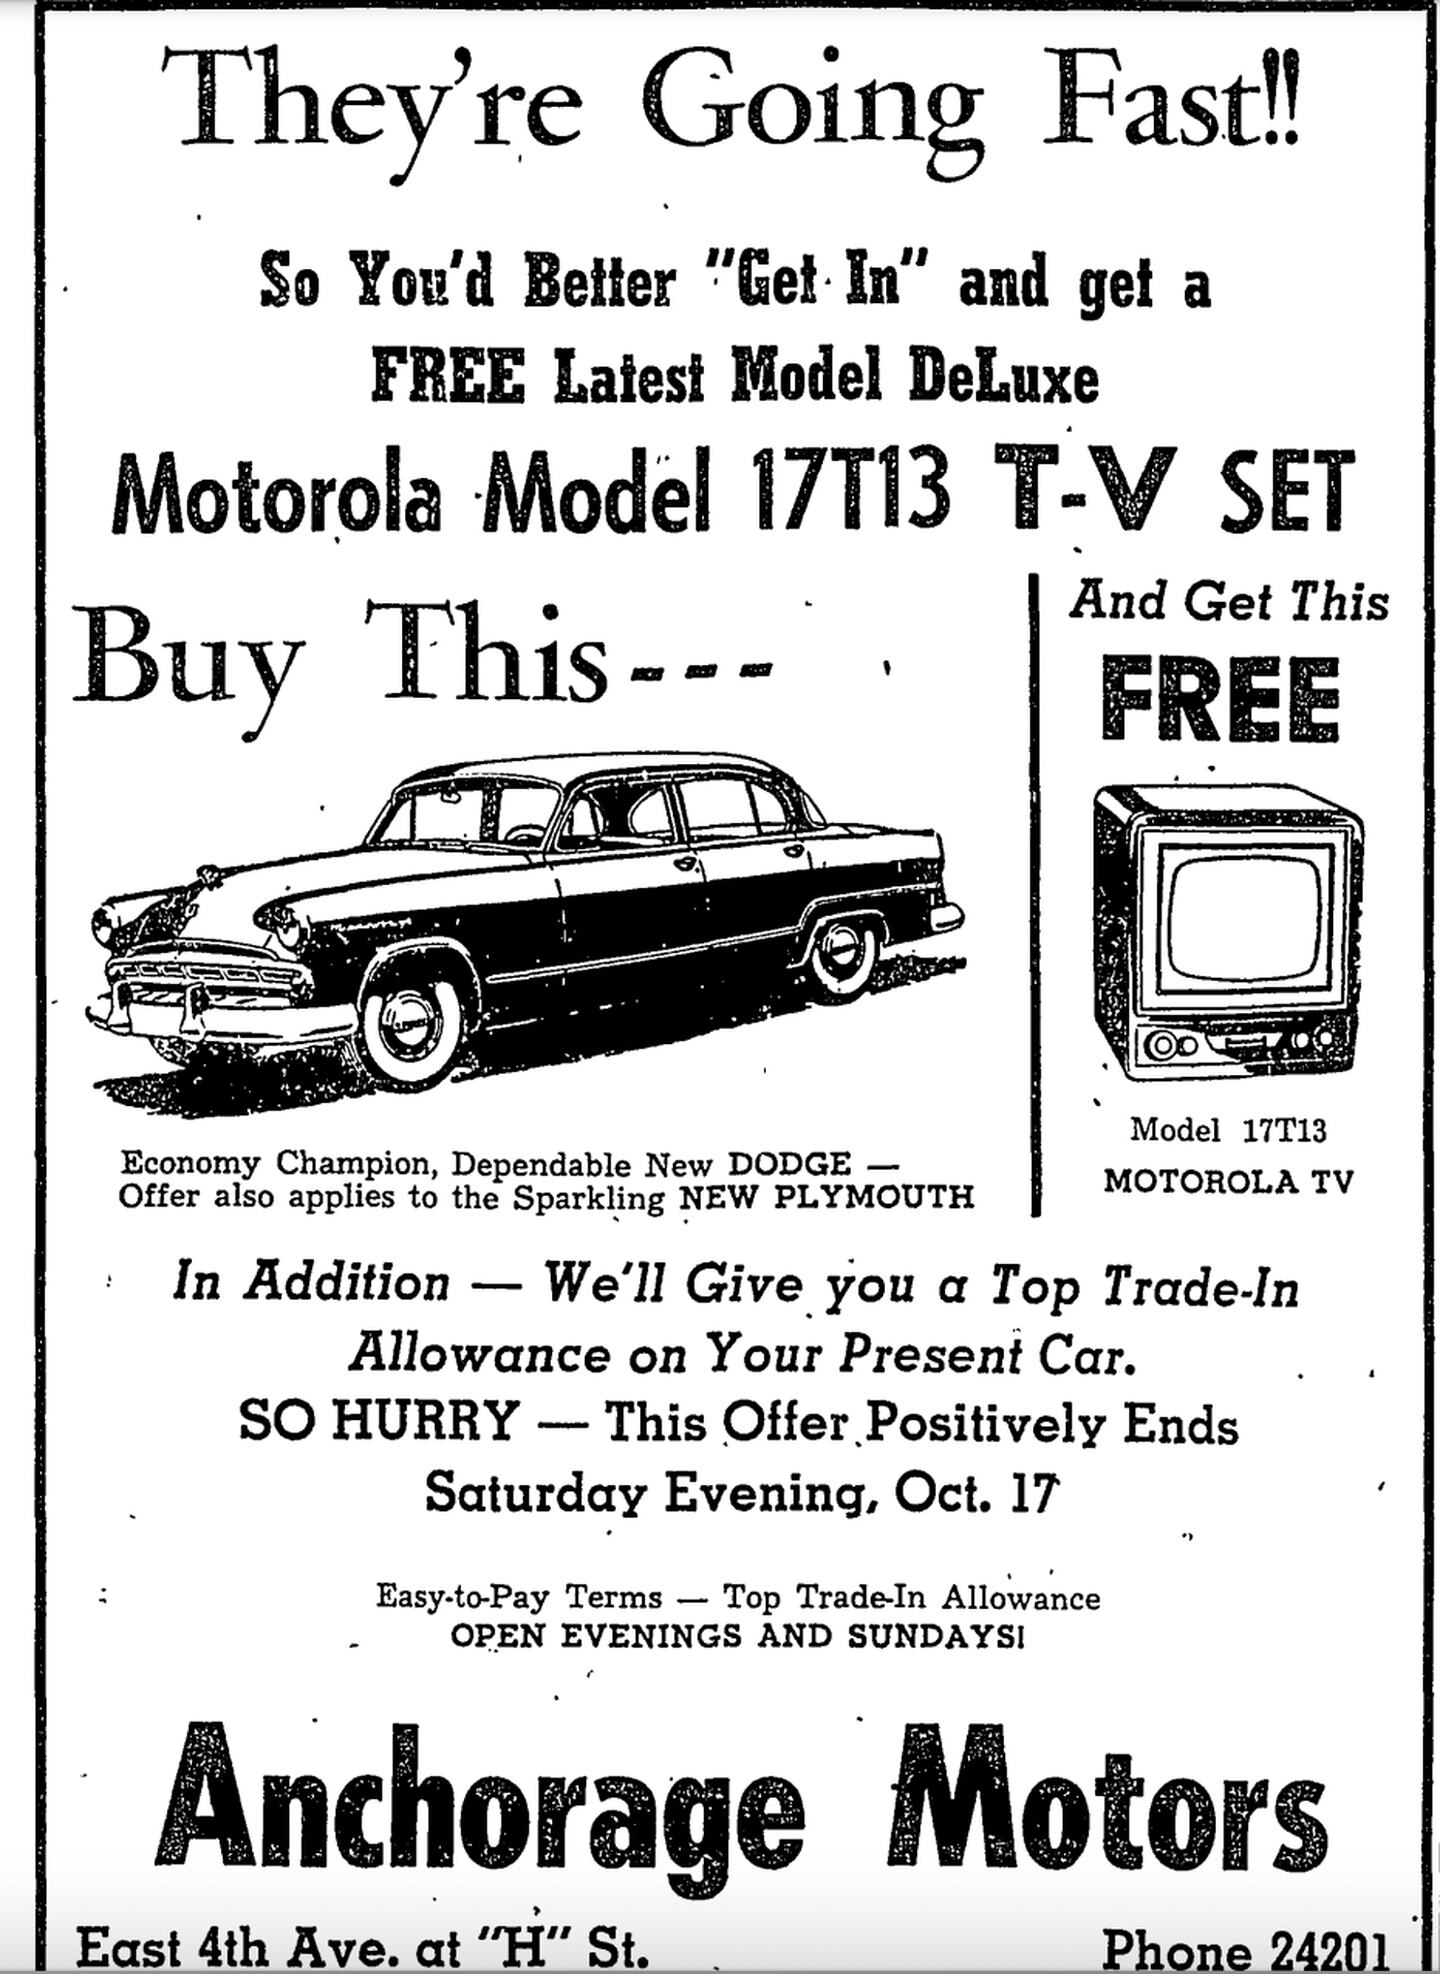 October 14, 1953, advertisement in the Anchorage Daily Times